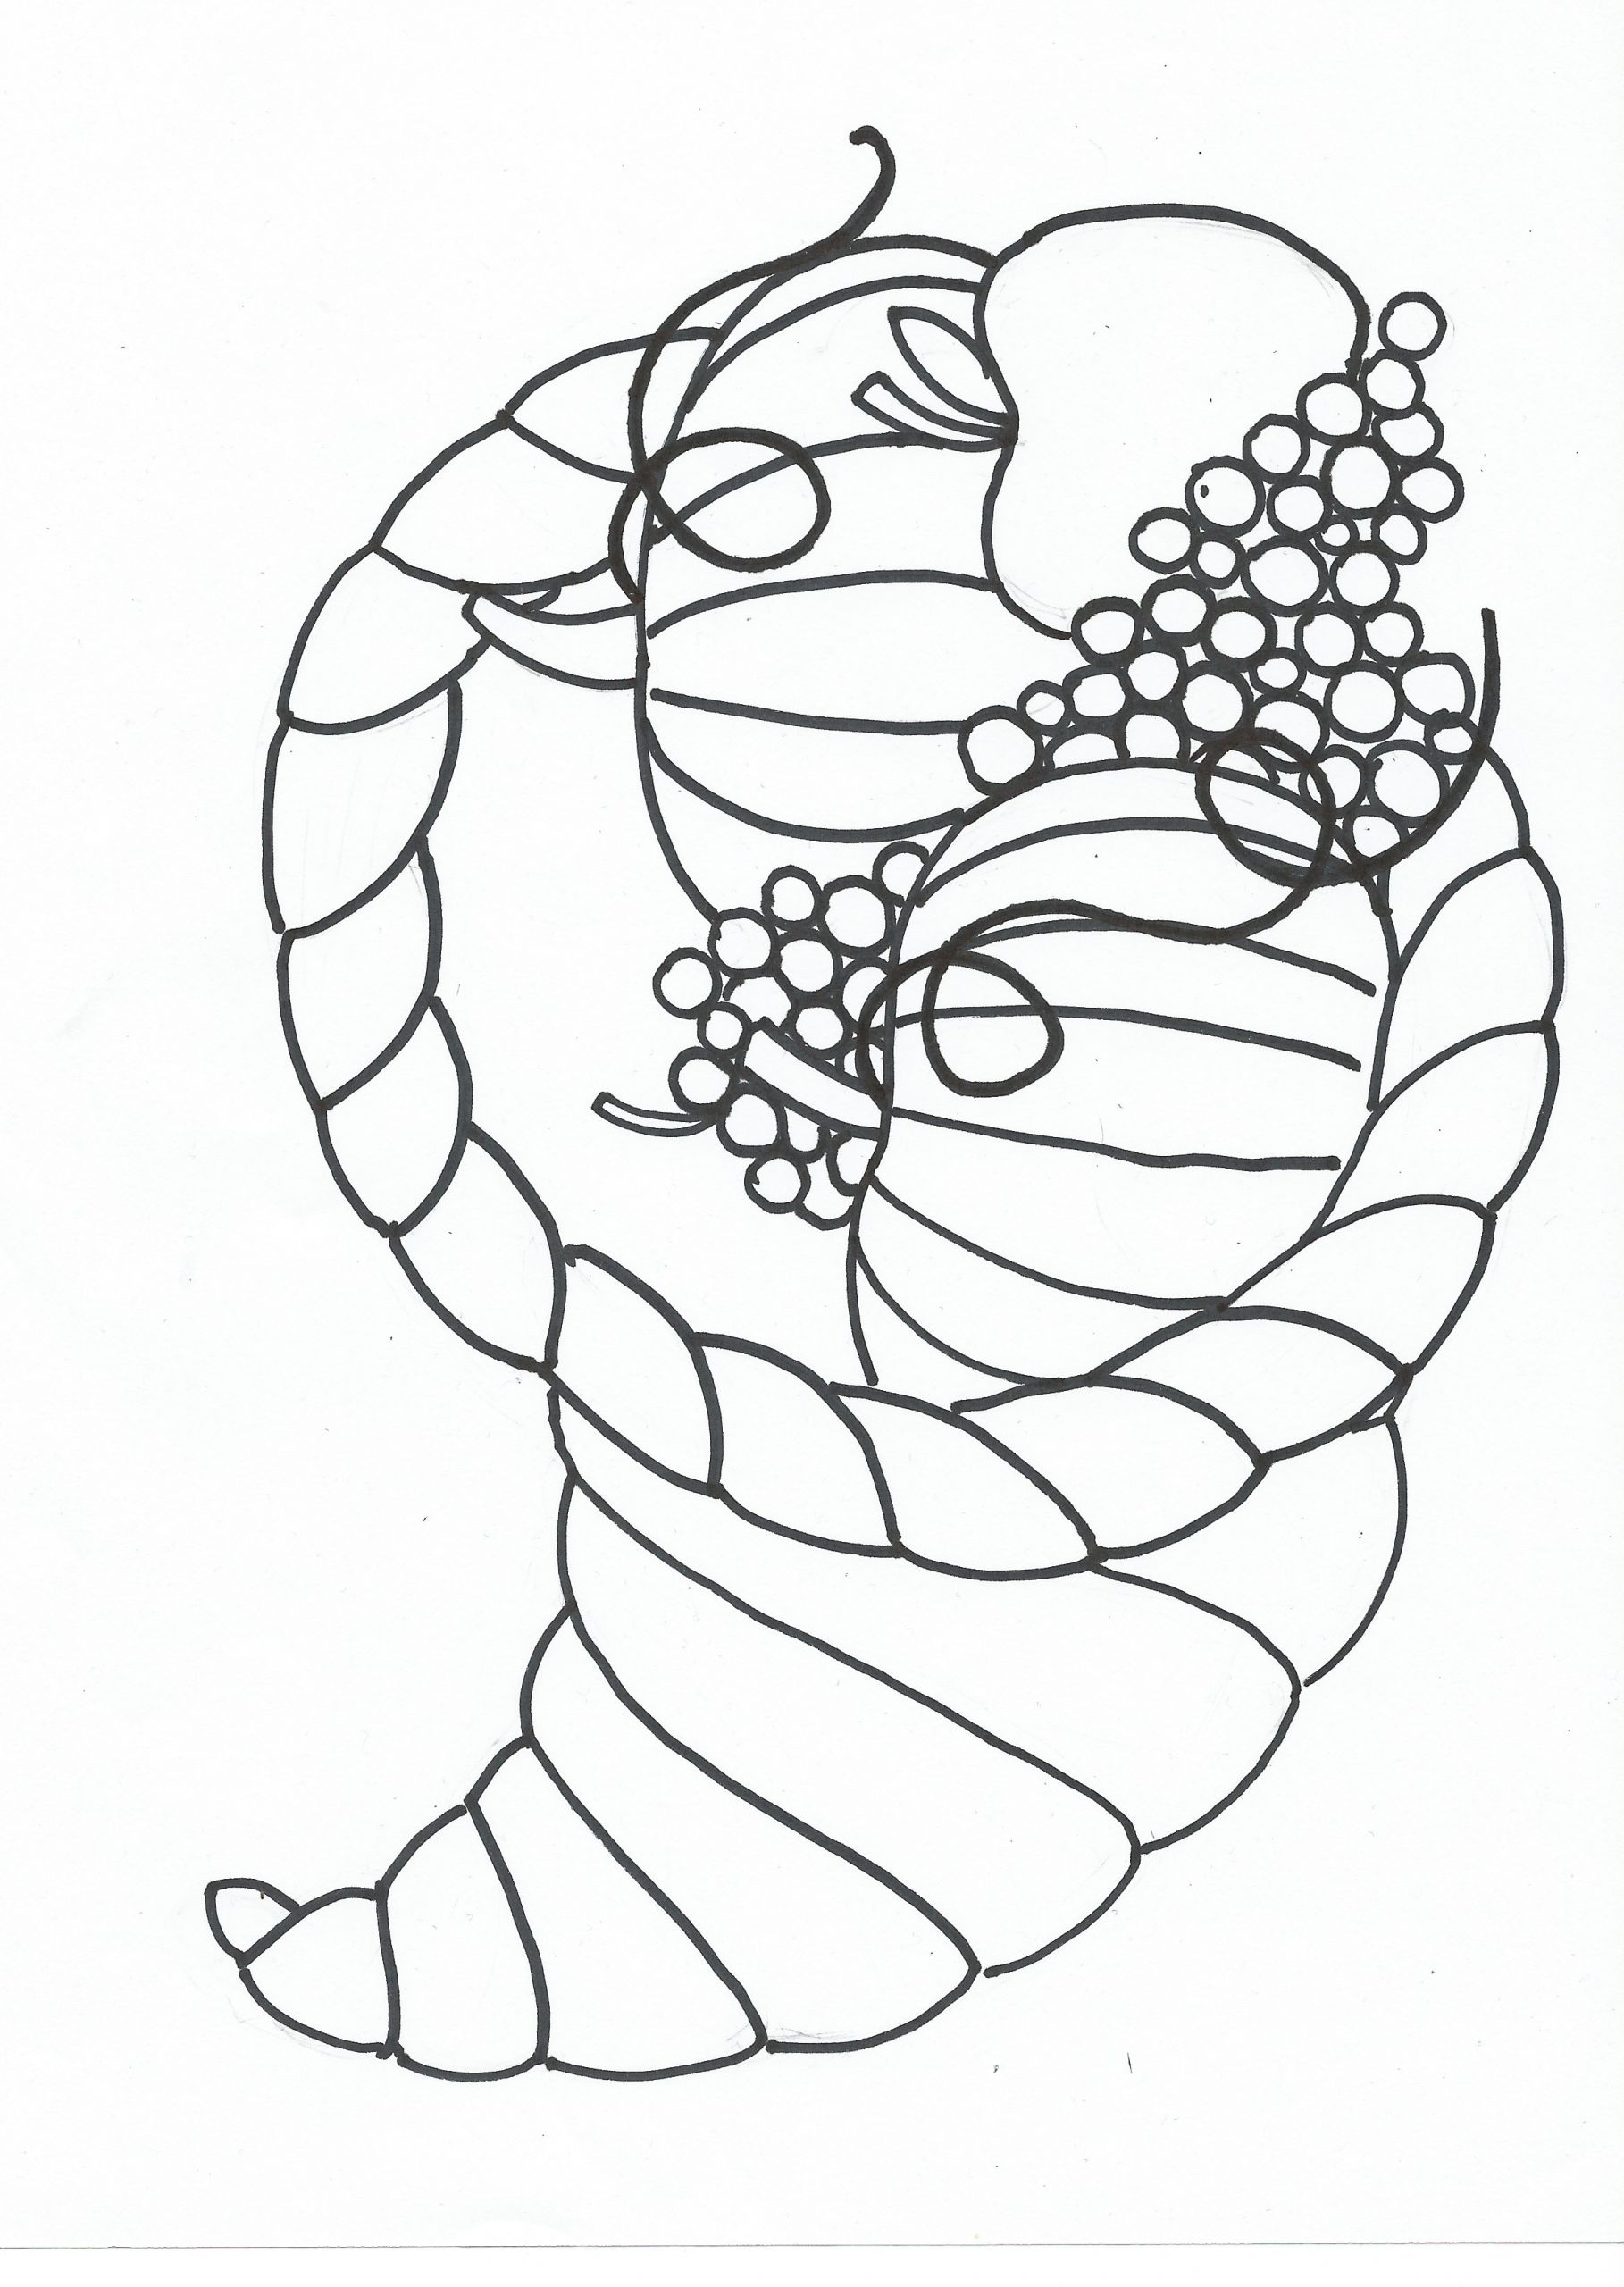 Coloring Pages Free Printable
 Printable Coloring Pages Free Samples & Free Stuff